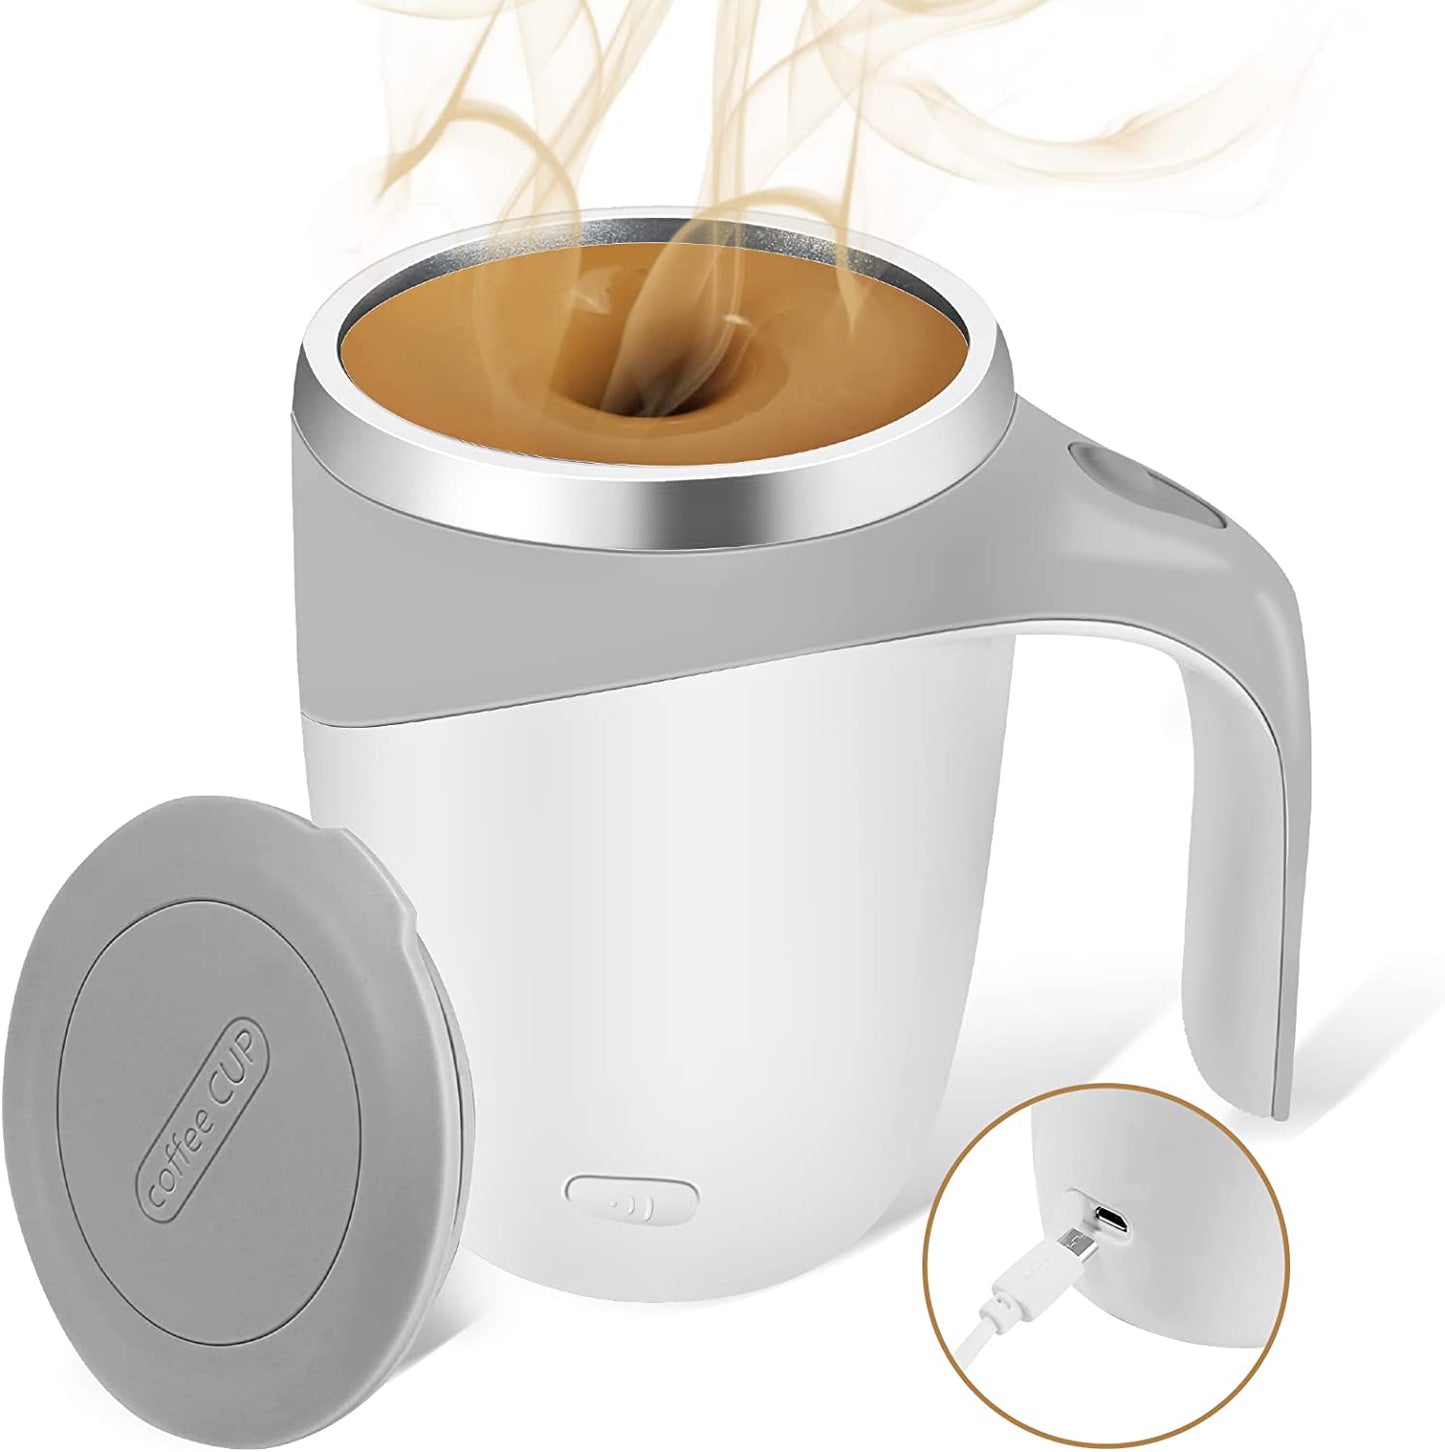 Self Stirring Mug,Rechargeable Automatic Magnetic Self Stirring Coffee Mug,Rotating Home Office Travel Mixing Cup,To Stir Coffee, Chocolate, Milk, Protein,Cocoa Etc, Great for Office, School, Gym…